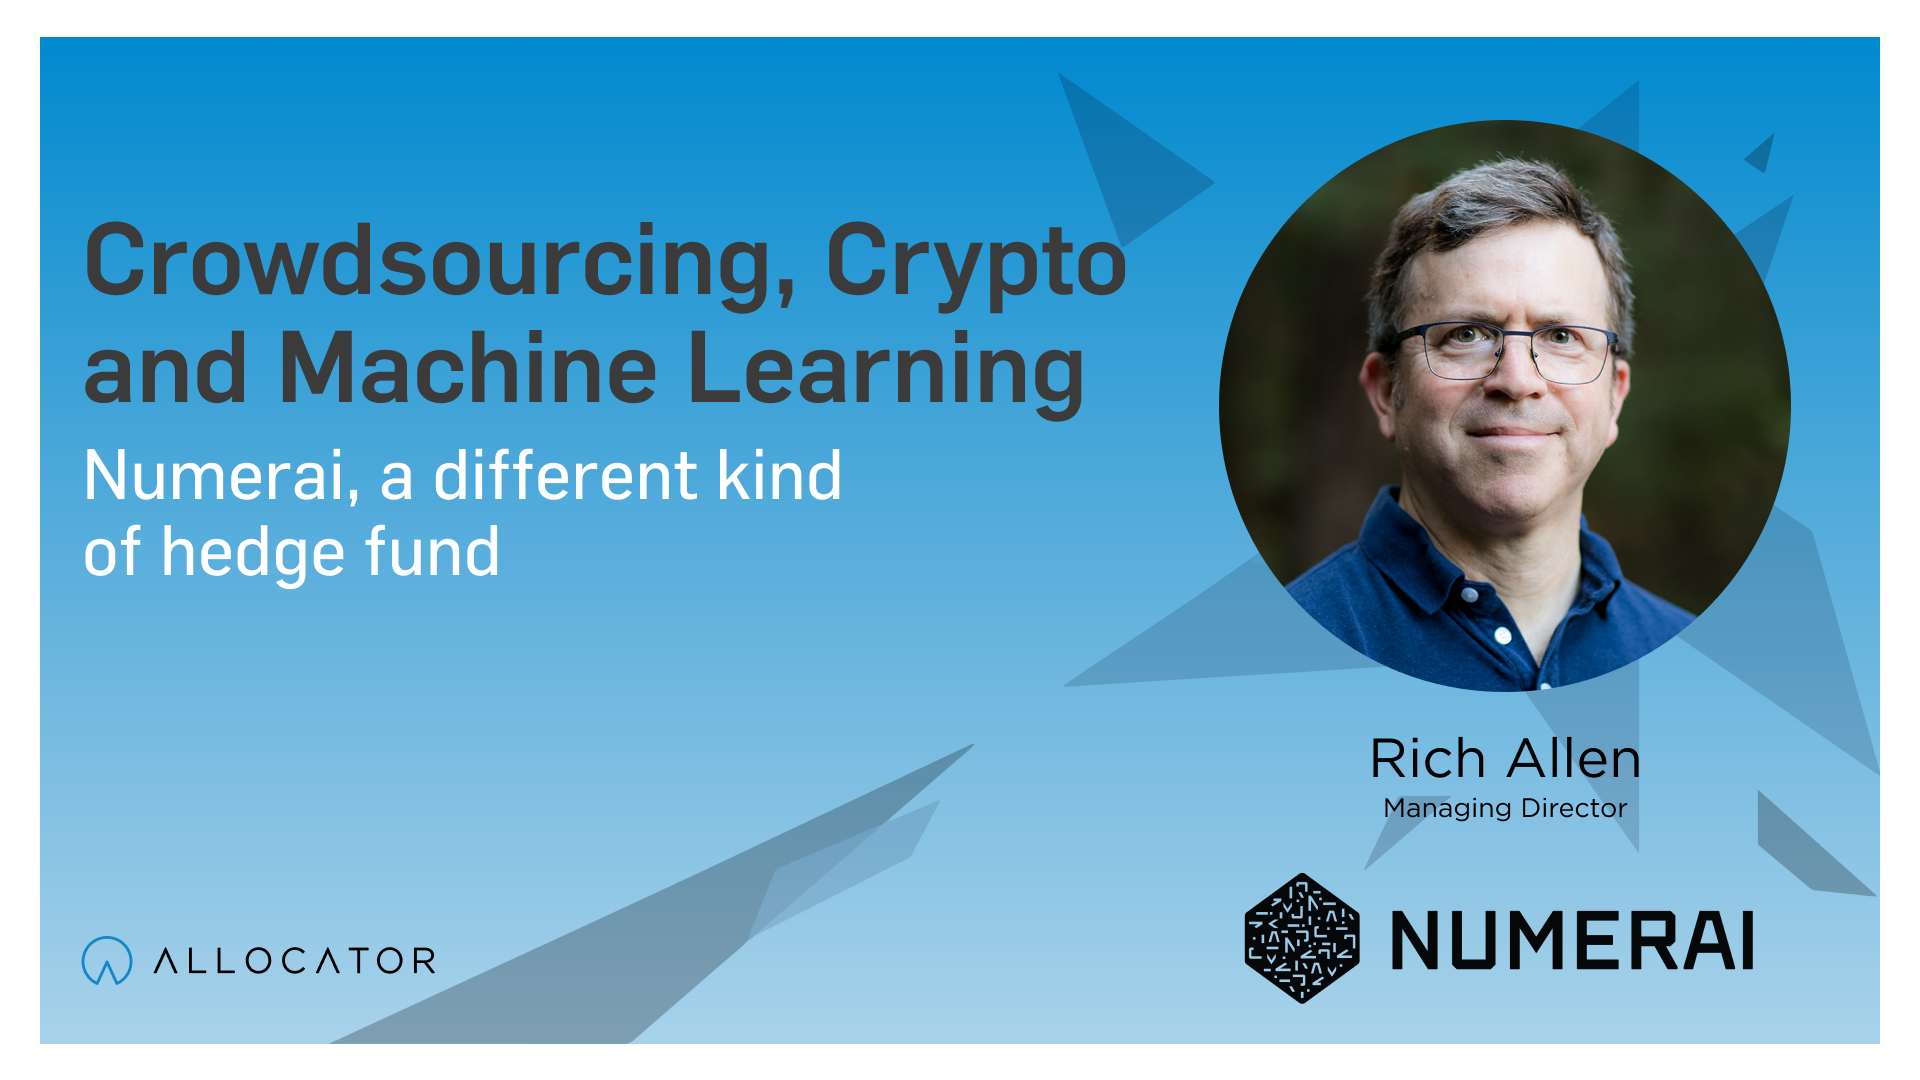 Numerai - Crowdsourcing, Crypto and Machine Learning